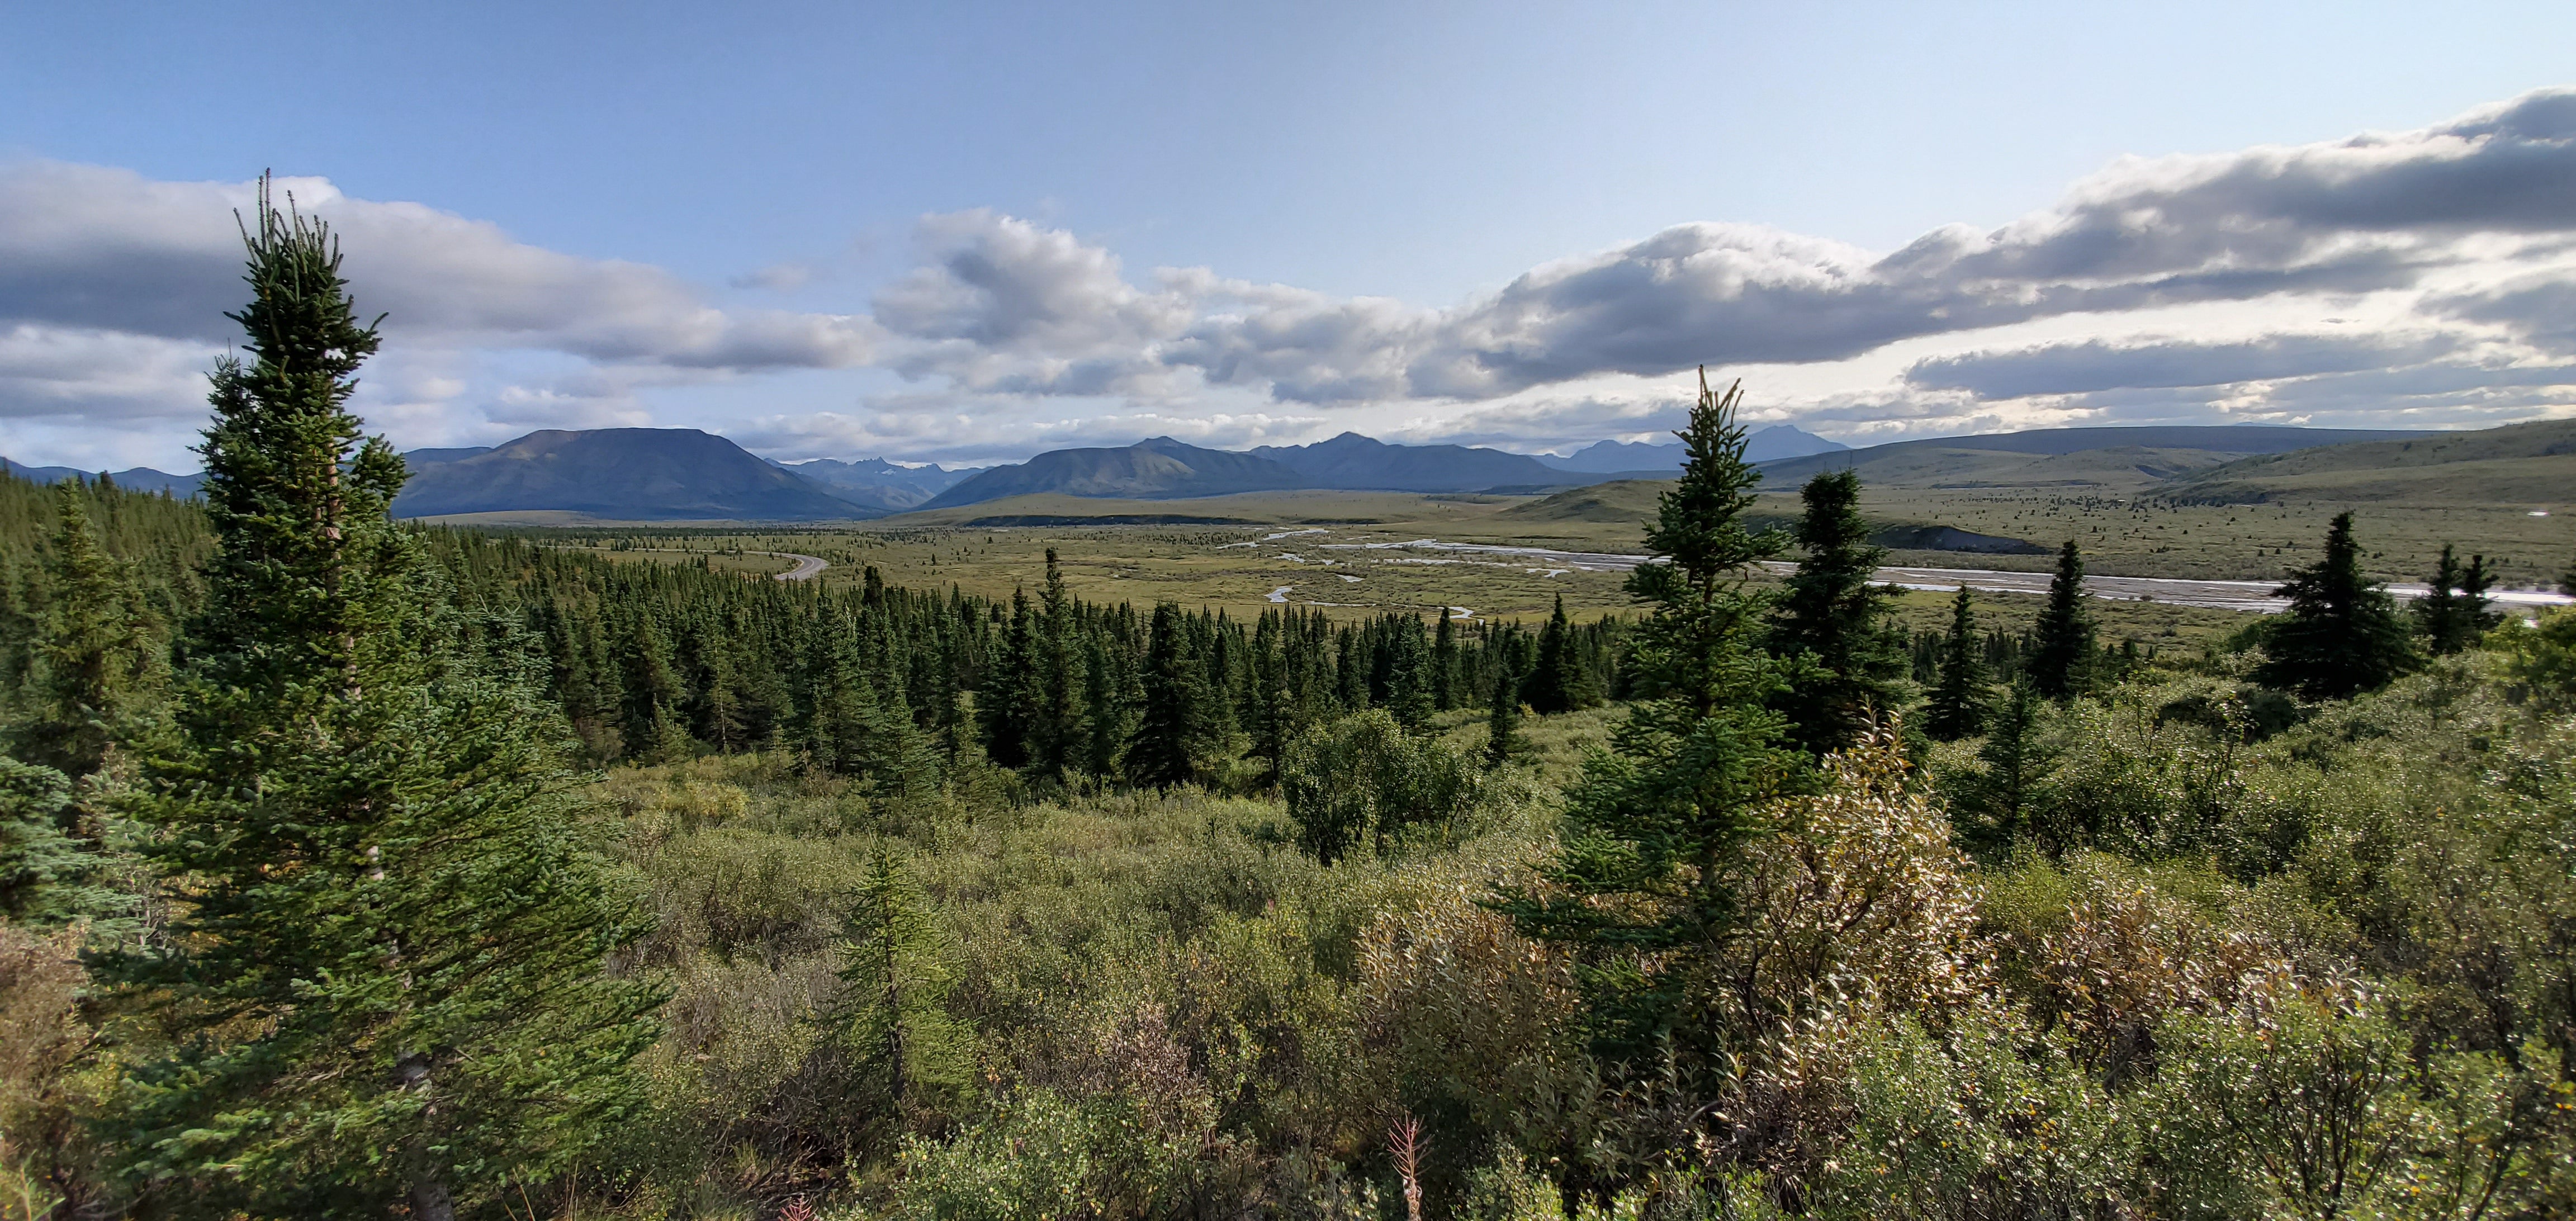 Views of Denali are available at mile 10 in the Park if the weather cooperates. The shuttle buses run frequently from Campground to Campground and stop at some easy trailheads and drop offs to the backcountry.